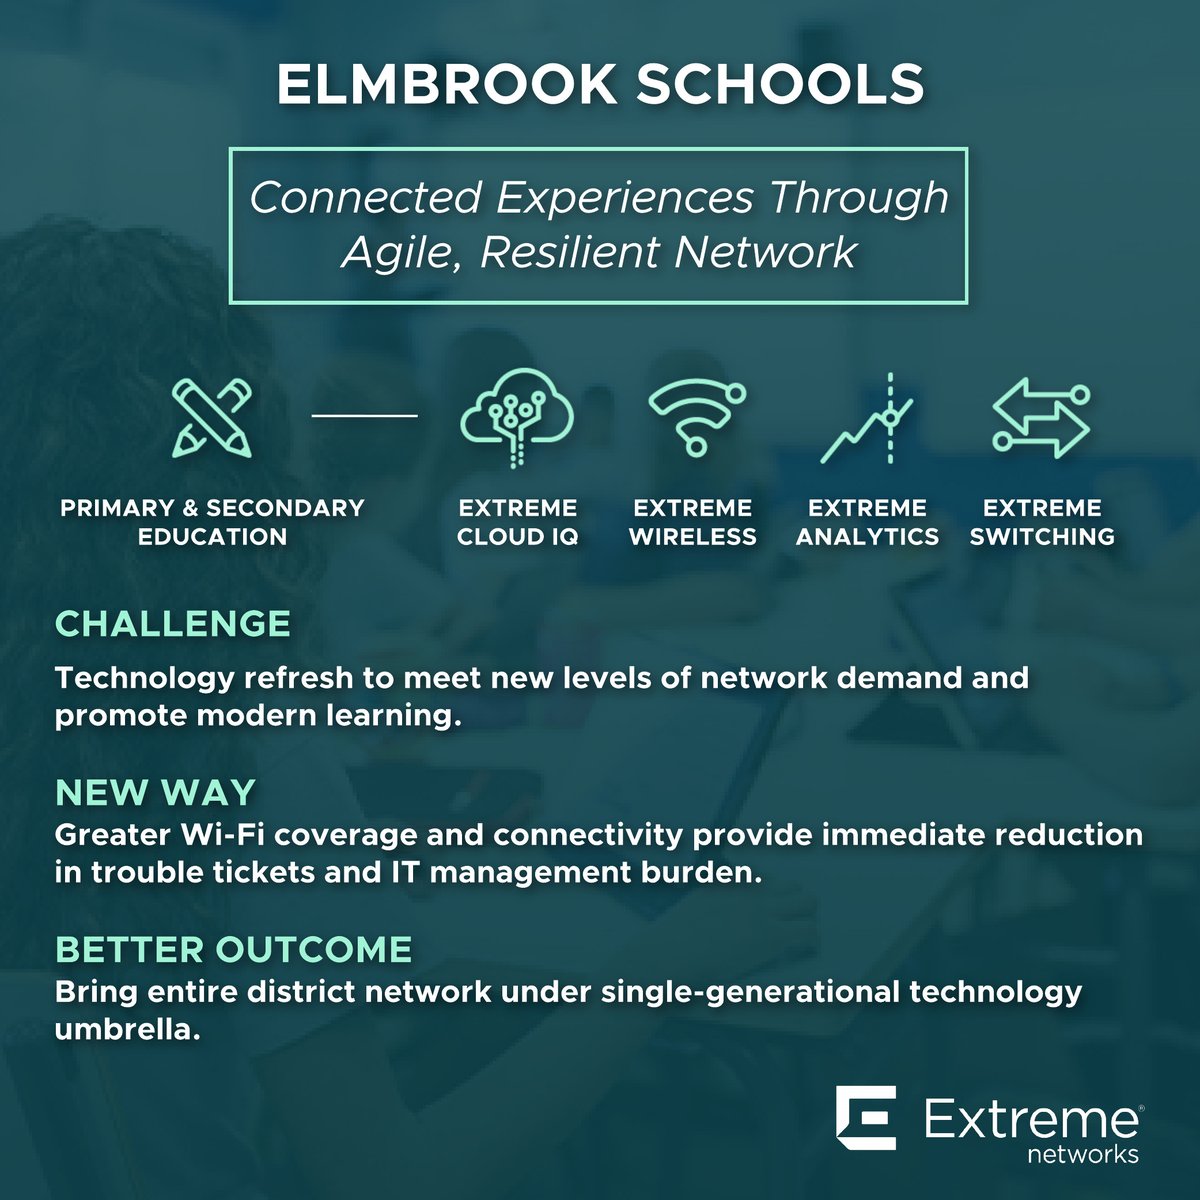 With simplified network management from the #cloud, the IT team at Elmbrook Schools is spending less time in the classroom addressing connectivity issues and more time on activities that drive greater value for the school district. See more stories: extremenetworks.com/about-extreme-…